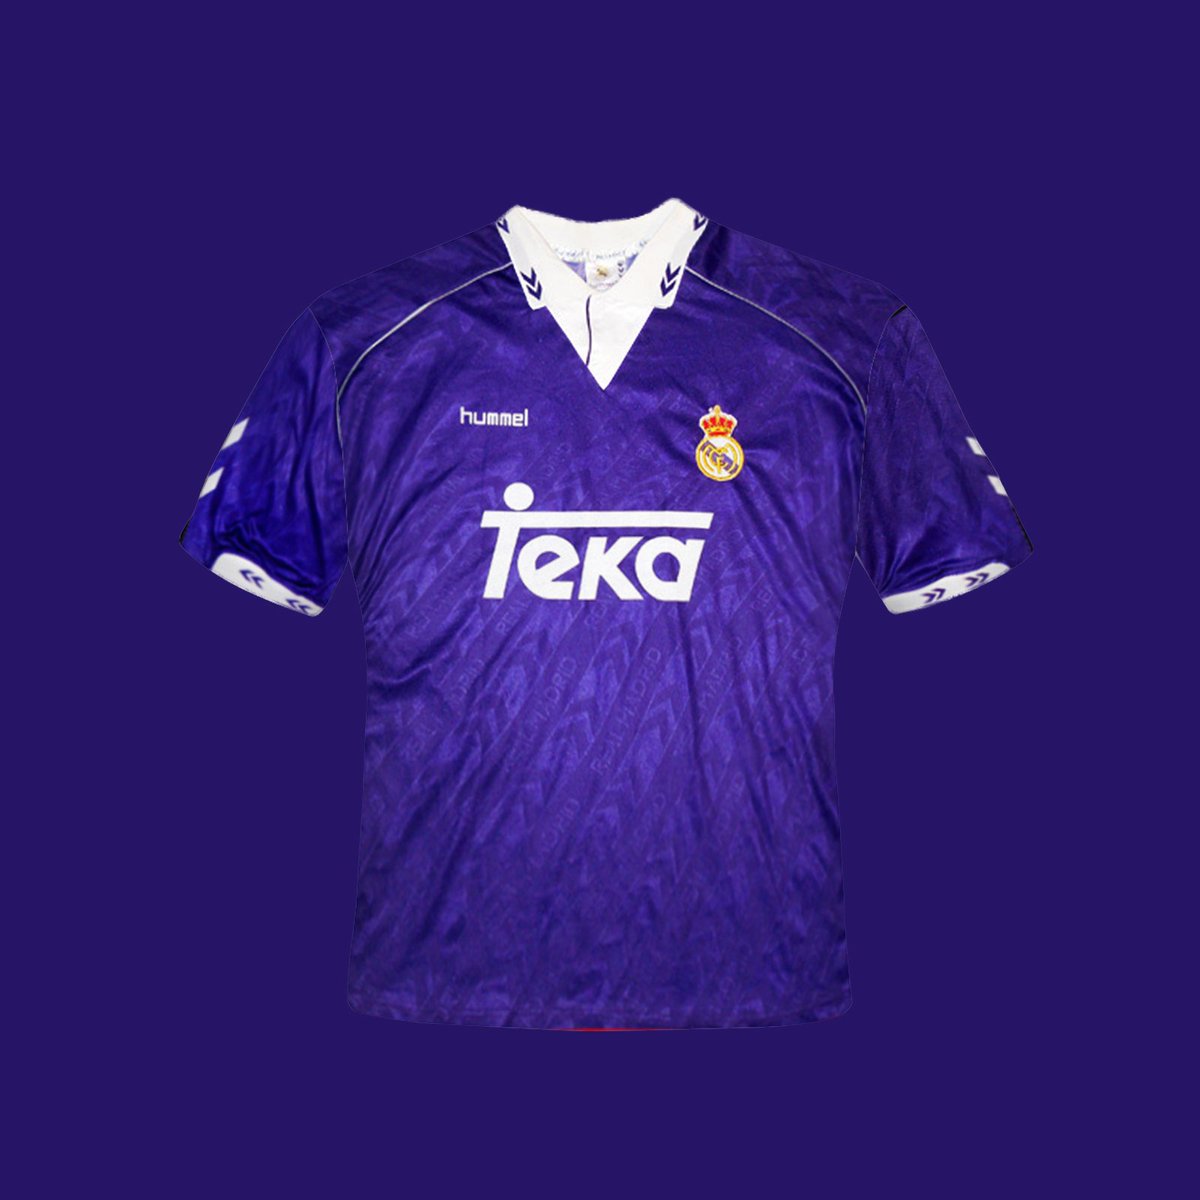 kommentar klamre sig deadline Classic Football Shirts on Twitter: "Real Madrid in Purple 1993 - Hummel  produced a purple away shirt in 1993 which didn't bring much luck as the  team slumped to 4th in La